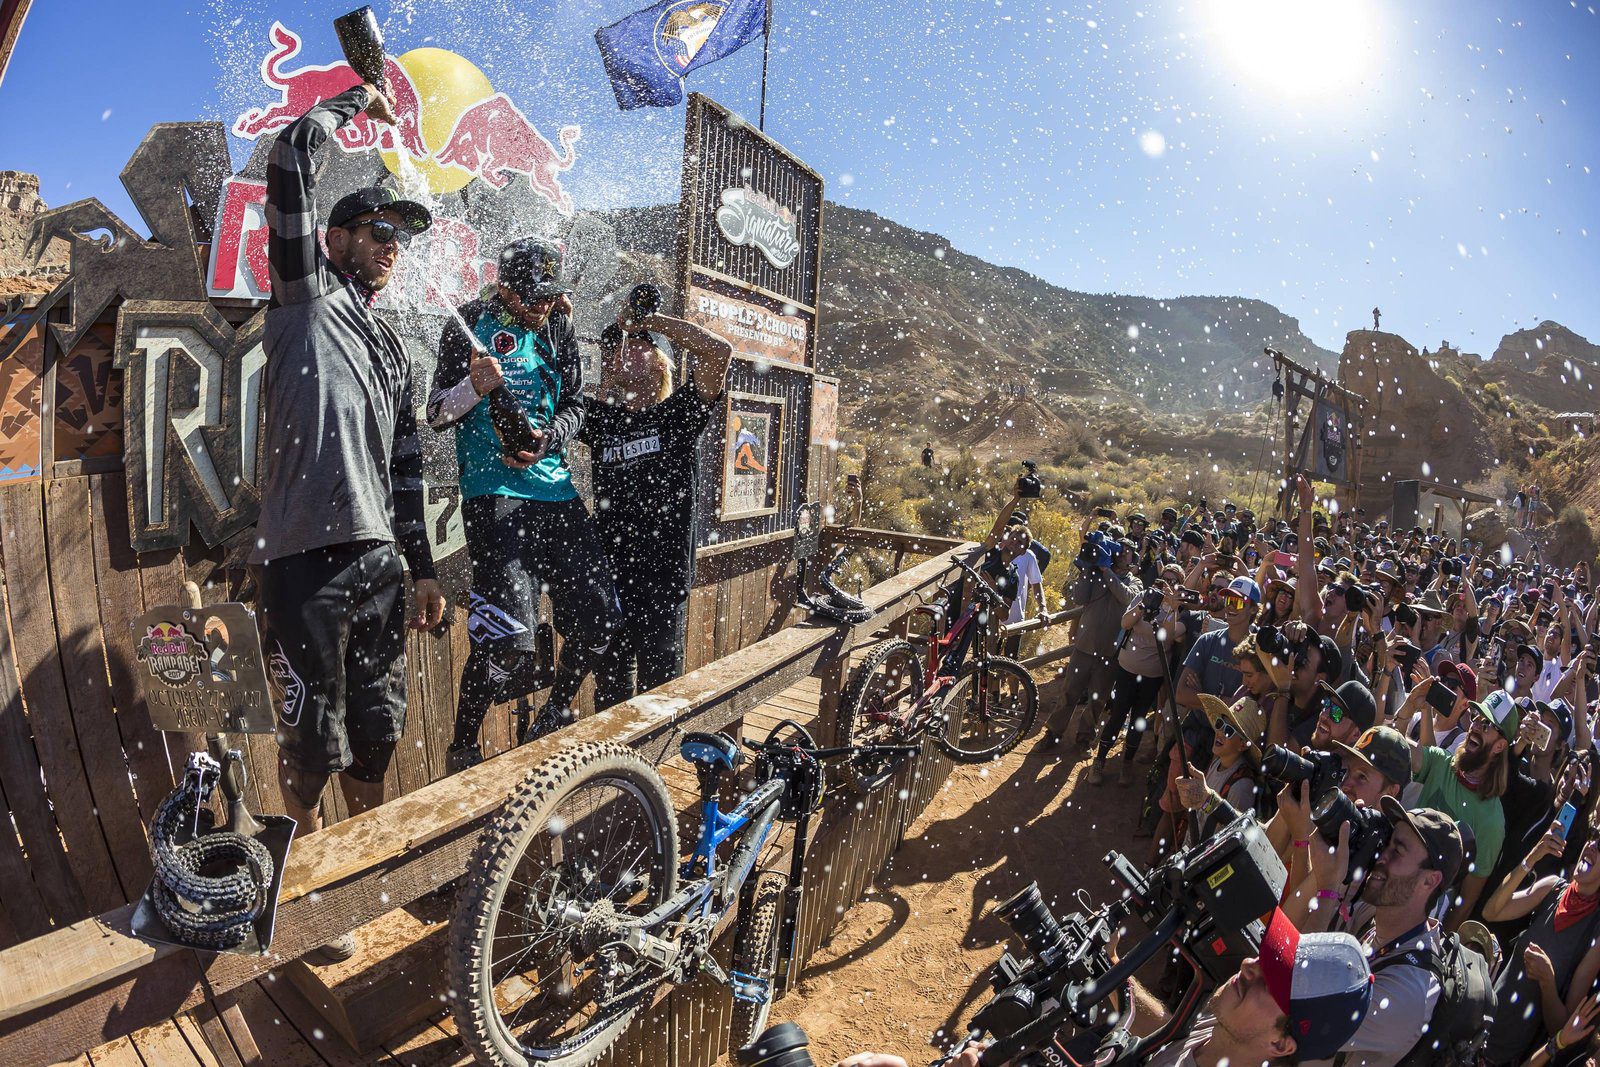 Re)Watch Red Bull Rampage 2018 live 